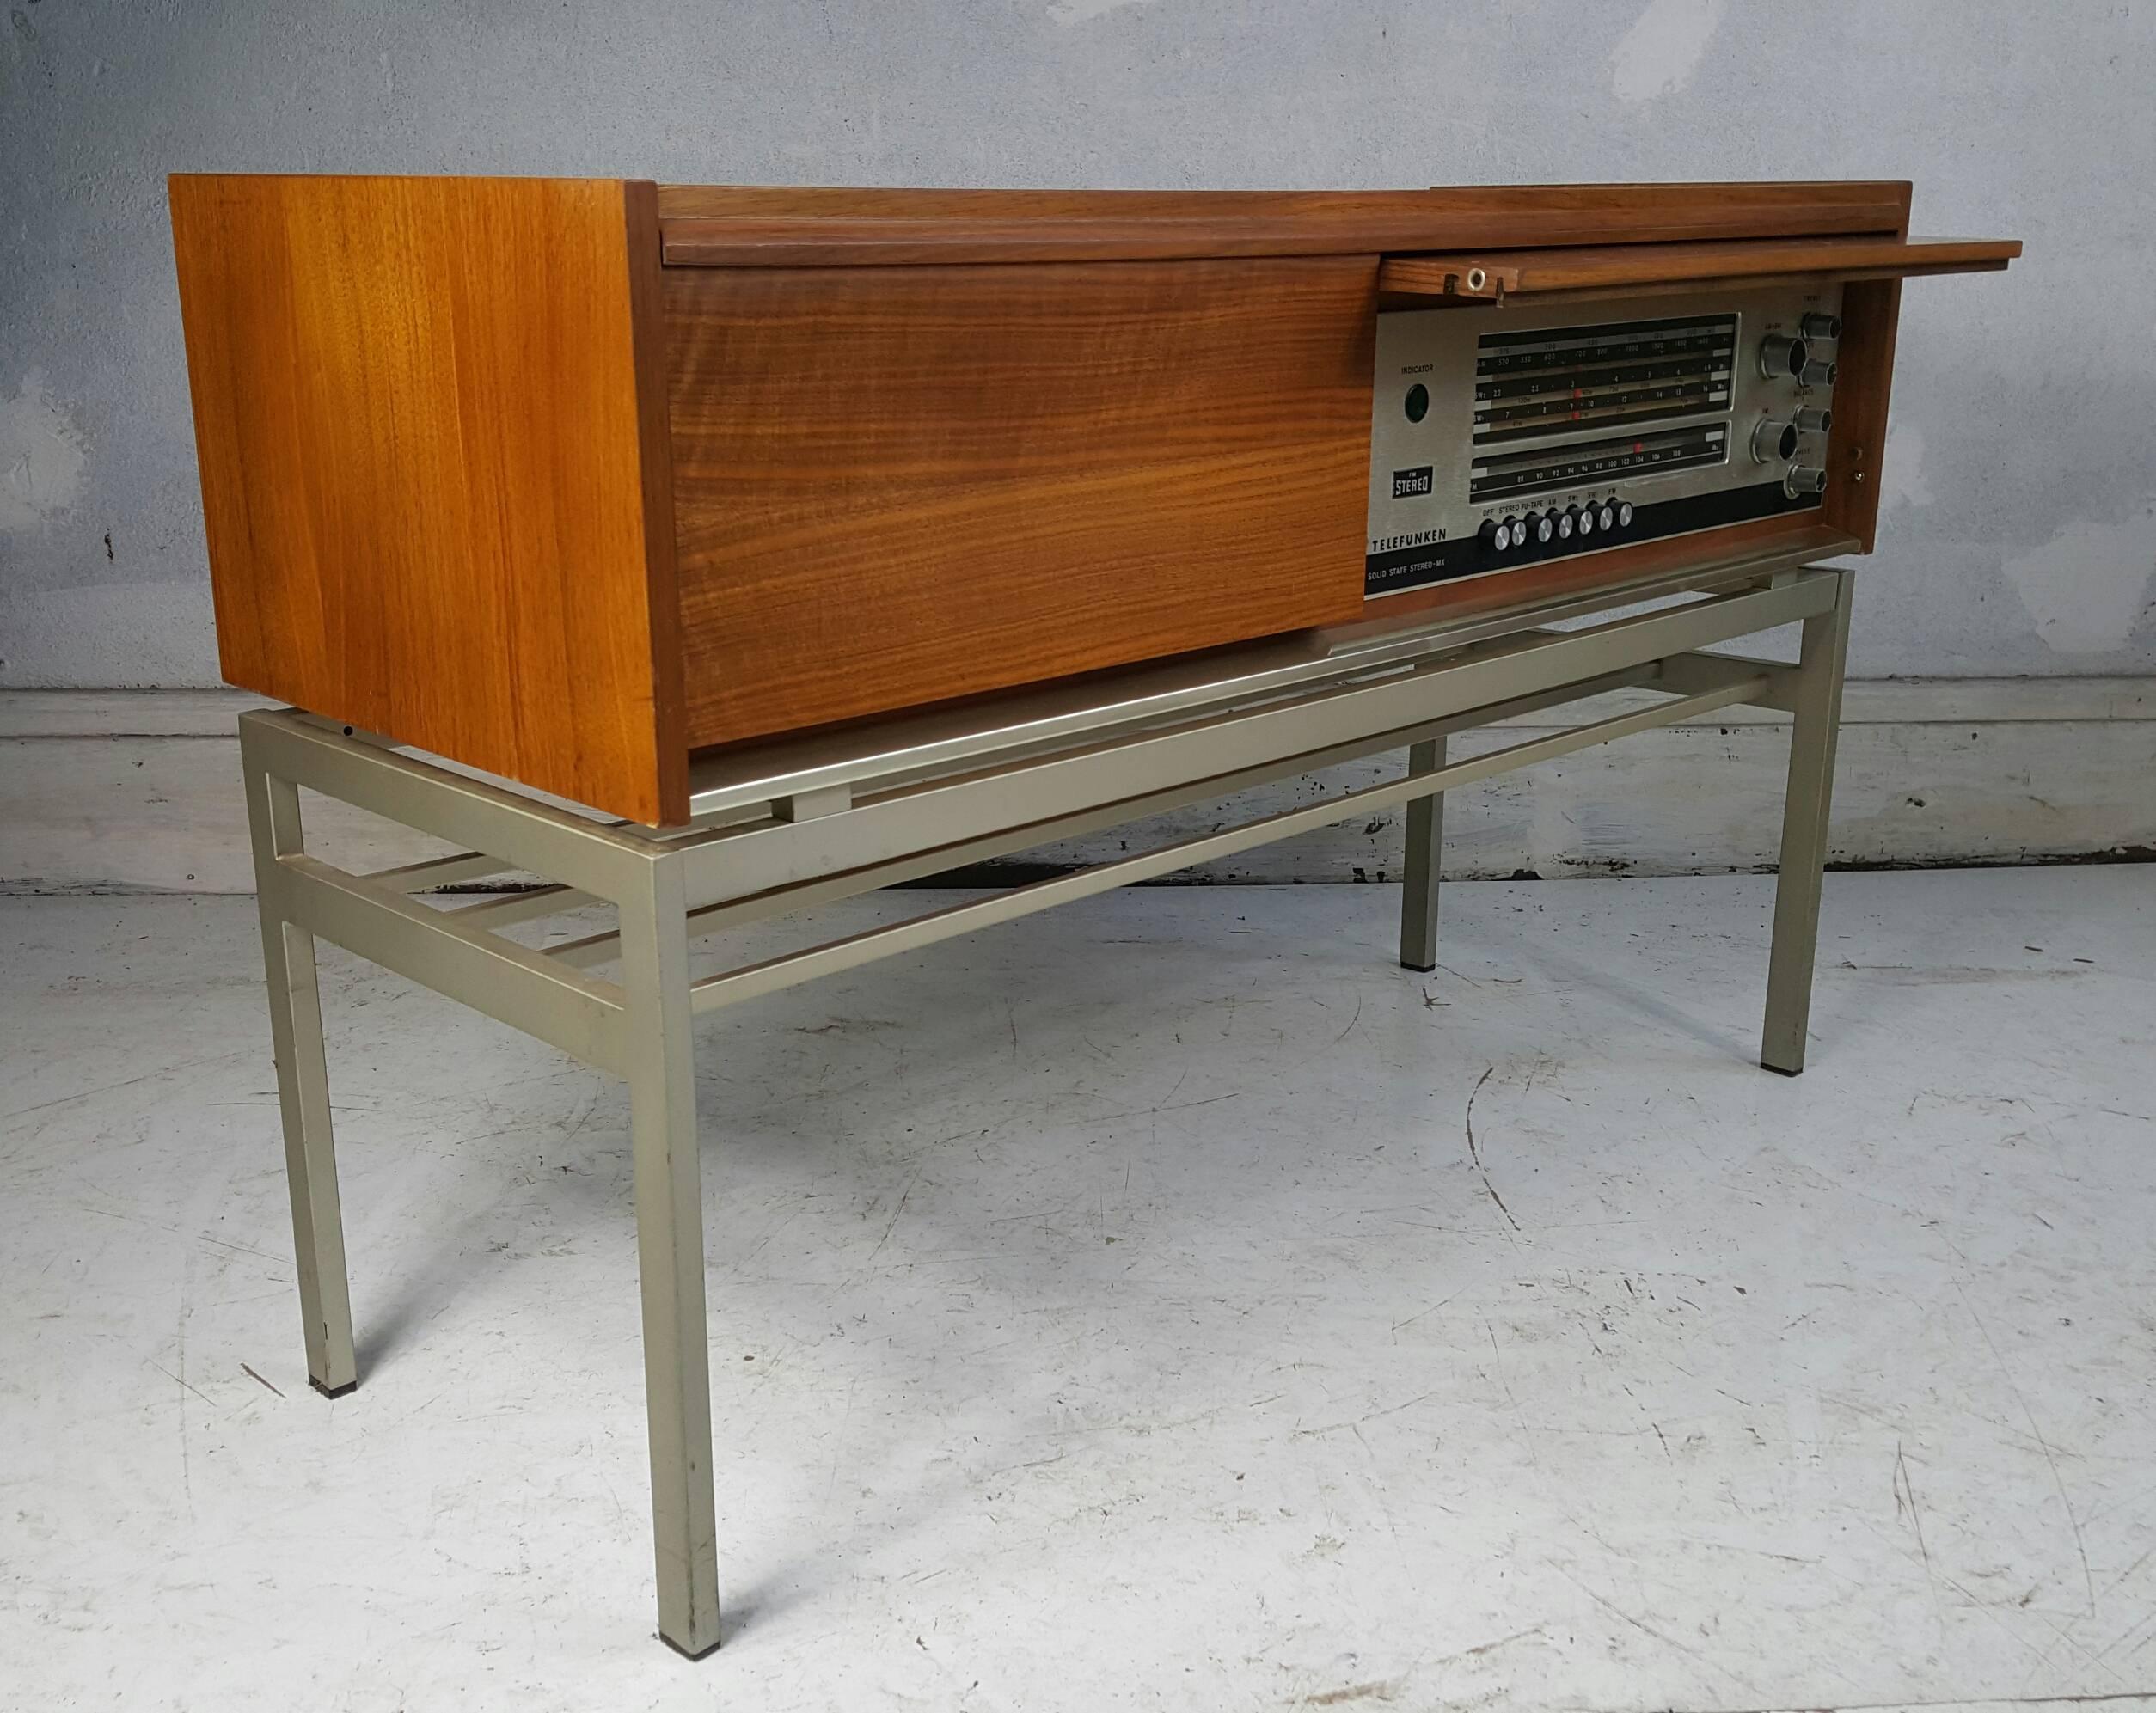 Modernist Telefunken Stereo, classic Florence Knoll design, all original, pull down panel door covers stereo if desired so it appears to look like a handsome modernist cabinet, perfect working condition, sounds amazing, looks amazing, can plug in